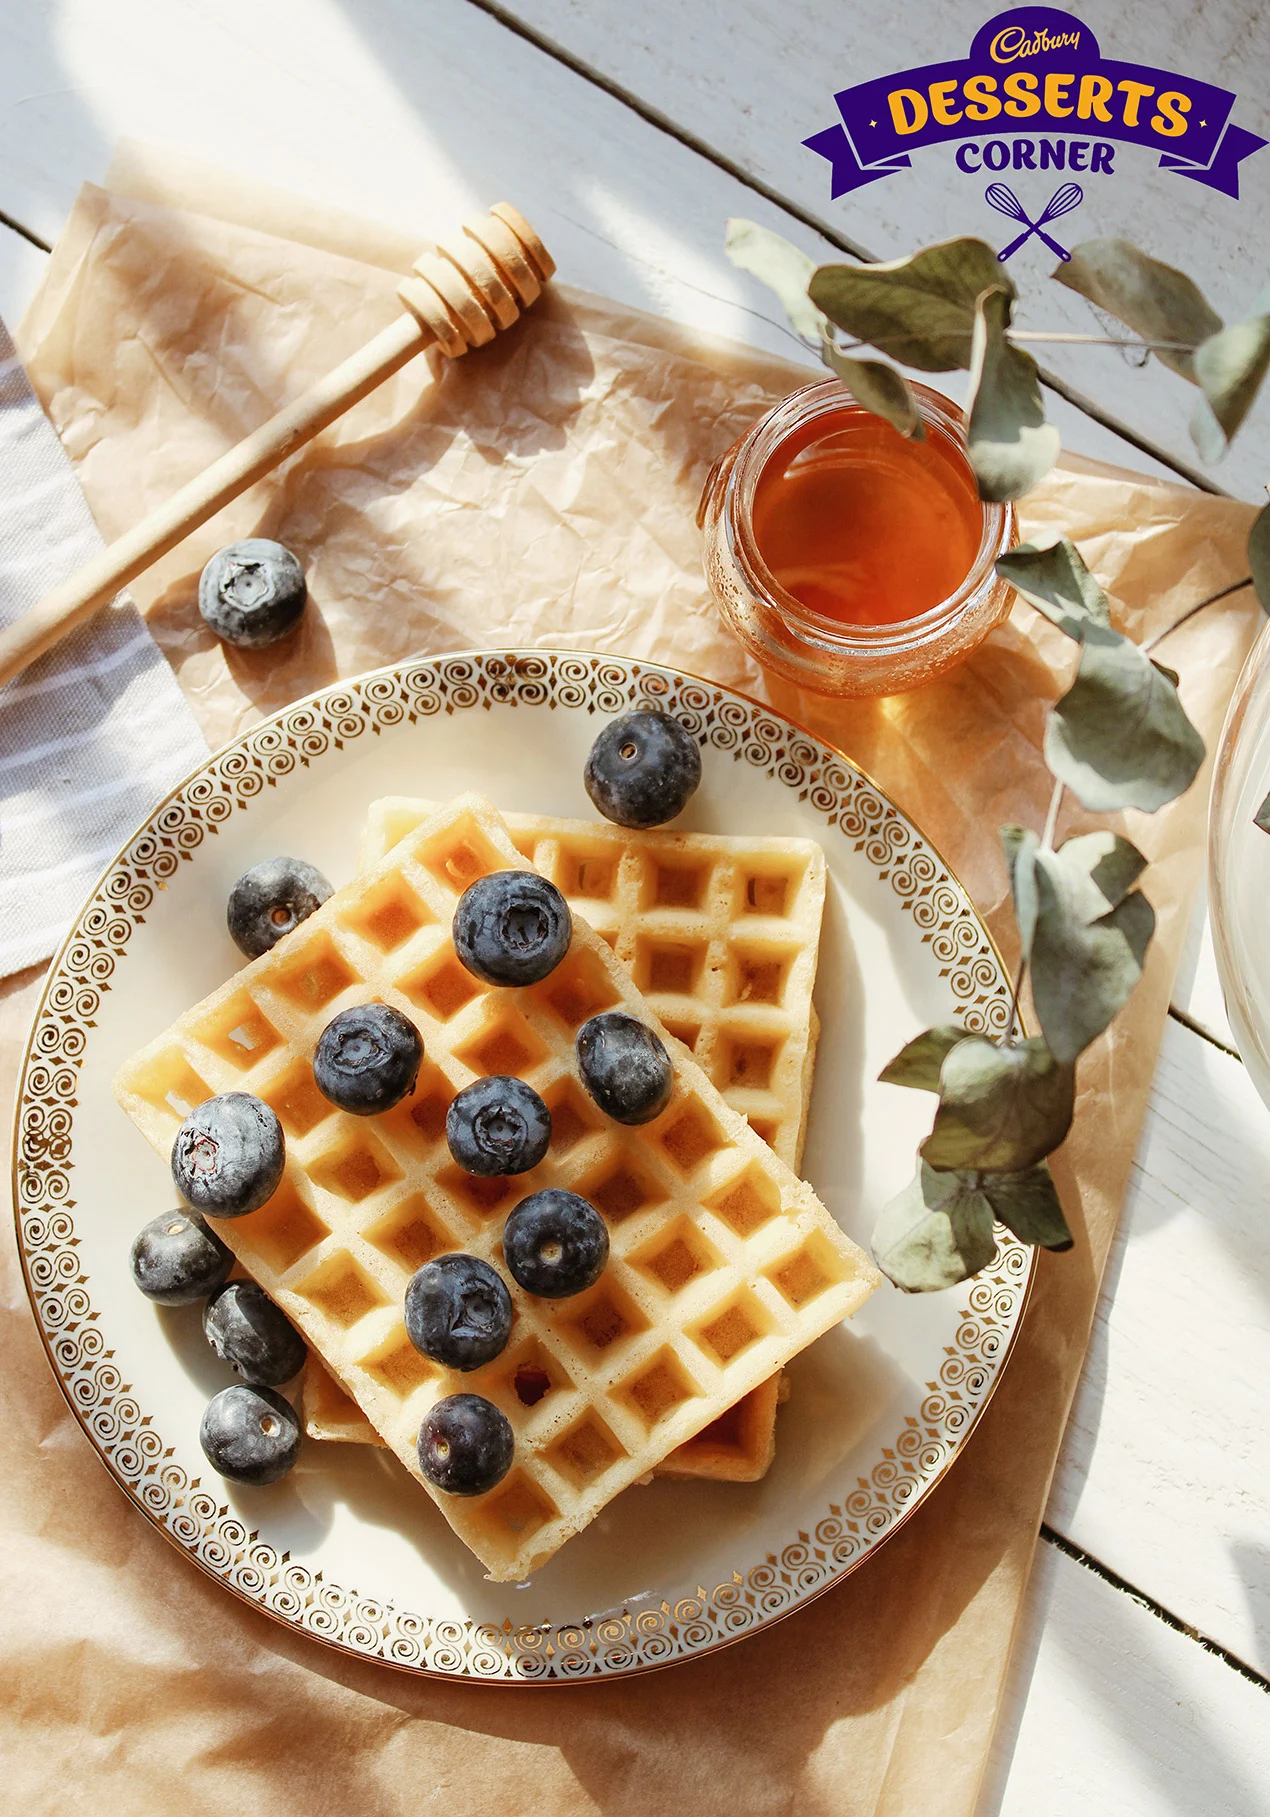 The 4,000-Year-Old History of Waffles: From Heated Stones to Electric Makers